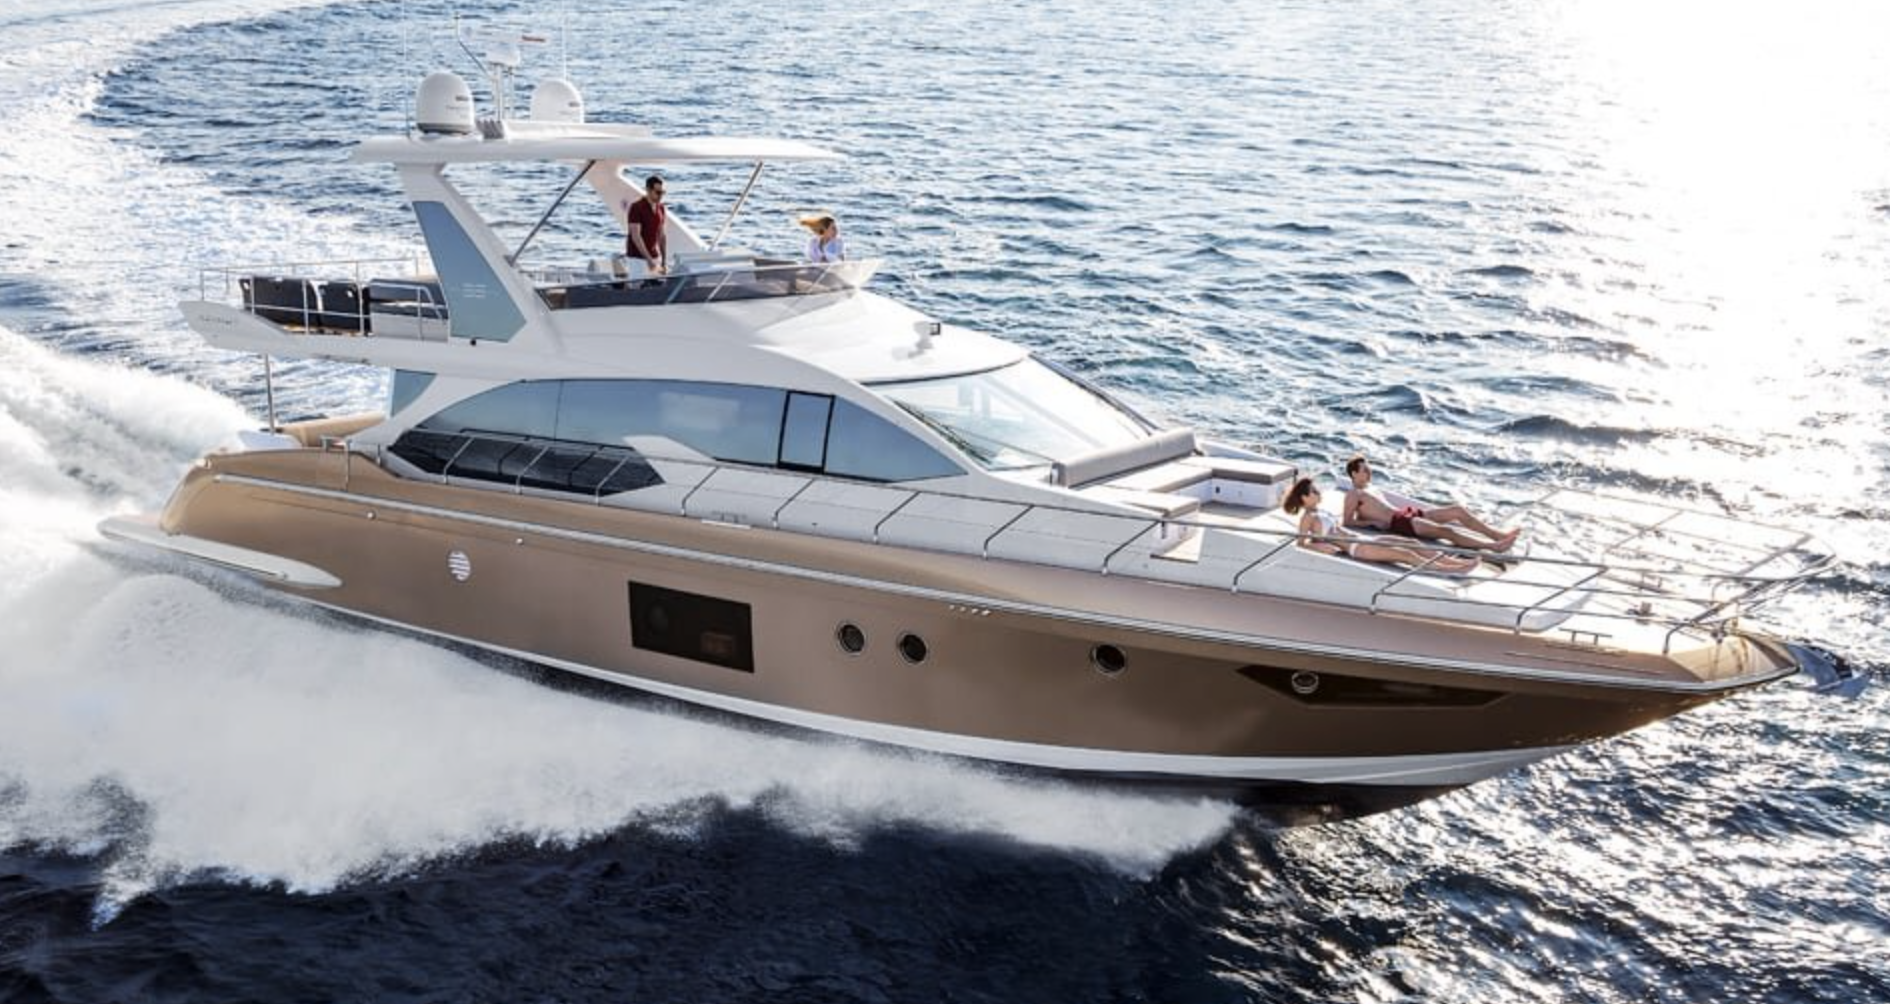 66 ft Azimut Auro | From $4450 | 13 guest max